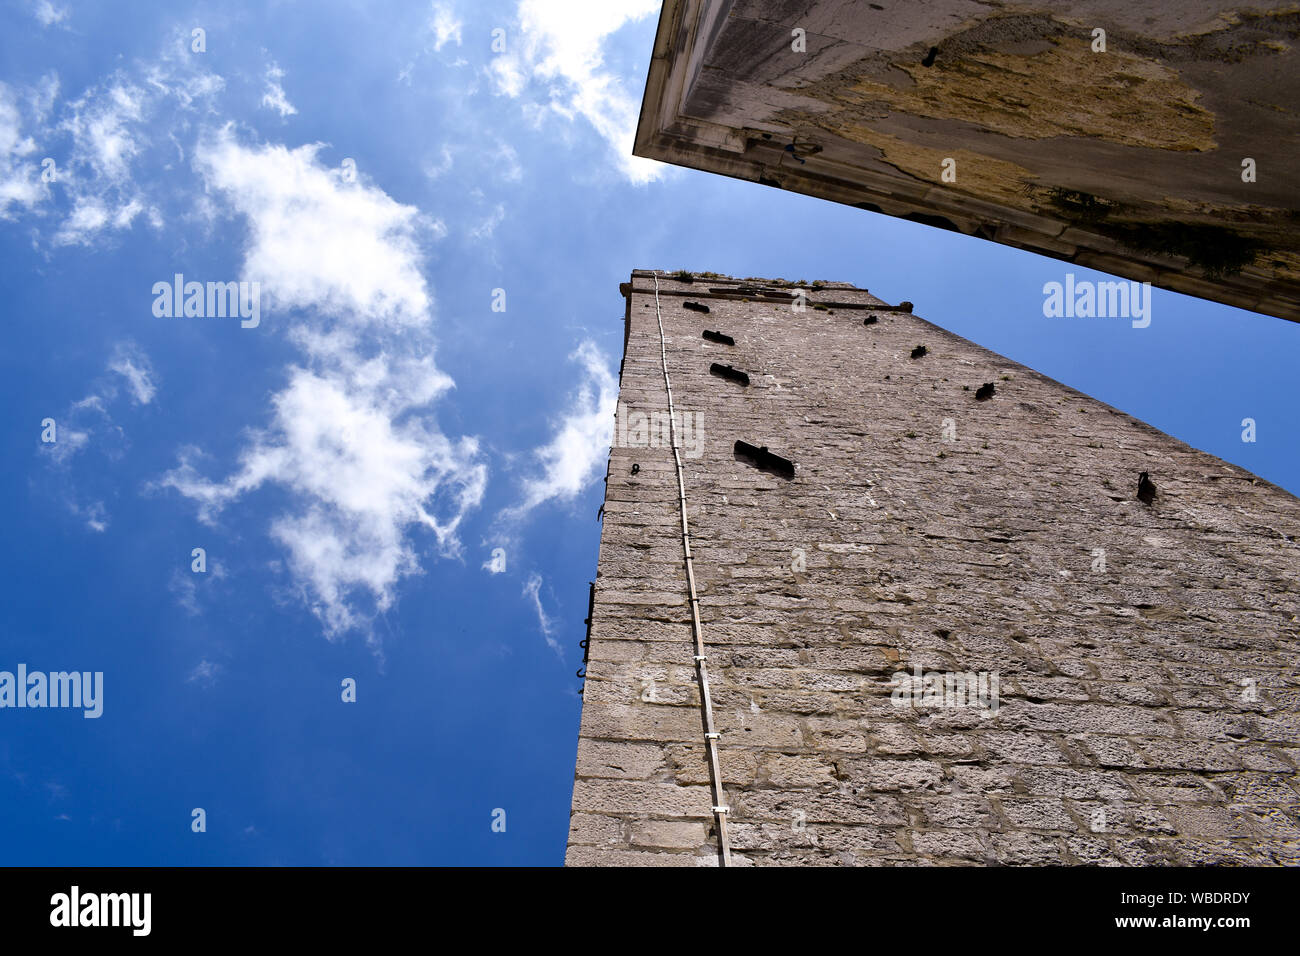 Ground view of roman tower in Motovun, Croatia. Blue sky with right white clouds during summer day. Stock Photo